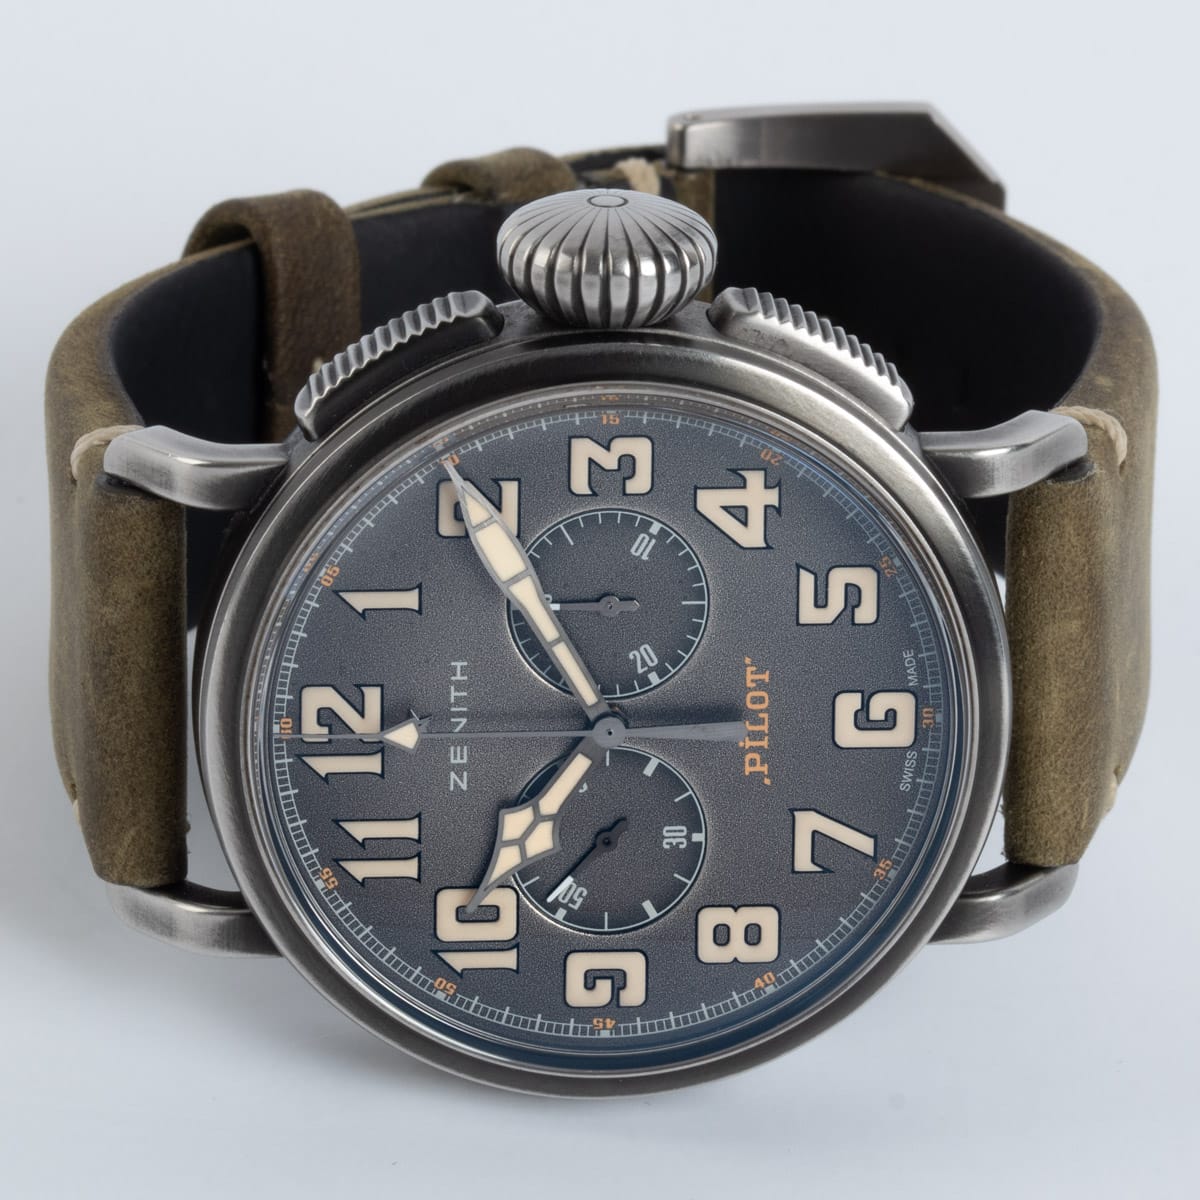 Front View of Pilot Type 20 Ton Up Chronograph